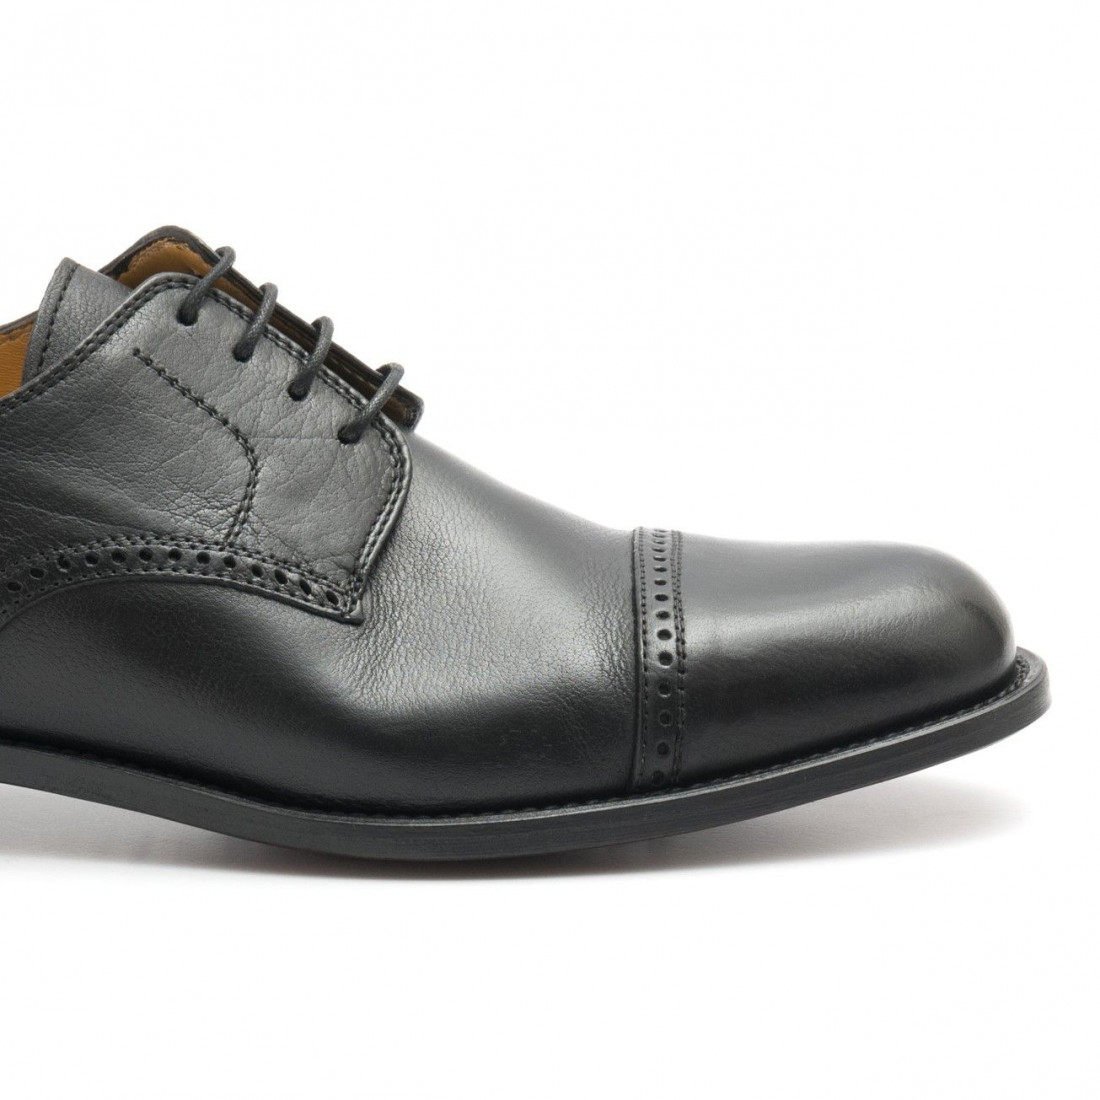 Black soft leather Calpierre derby shoes with footbed